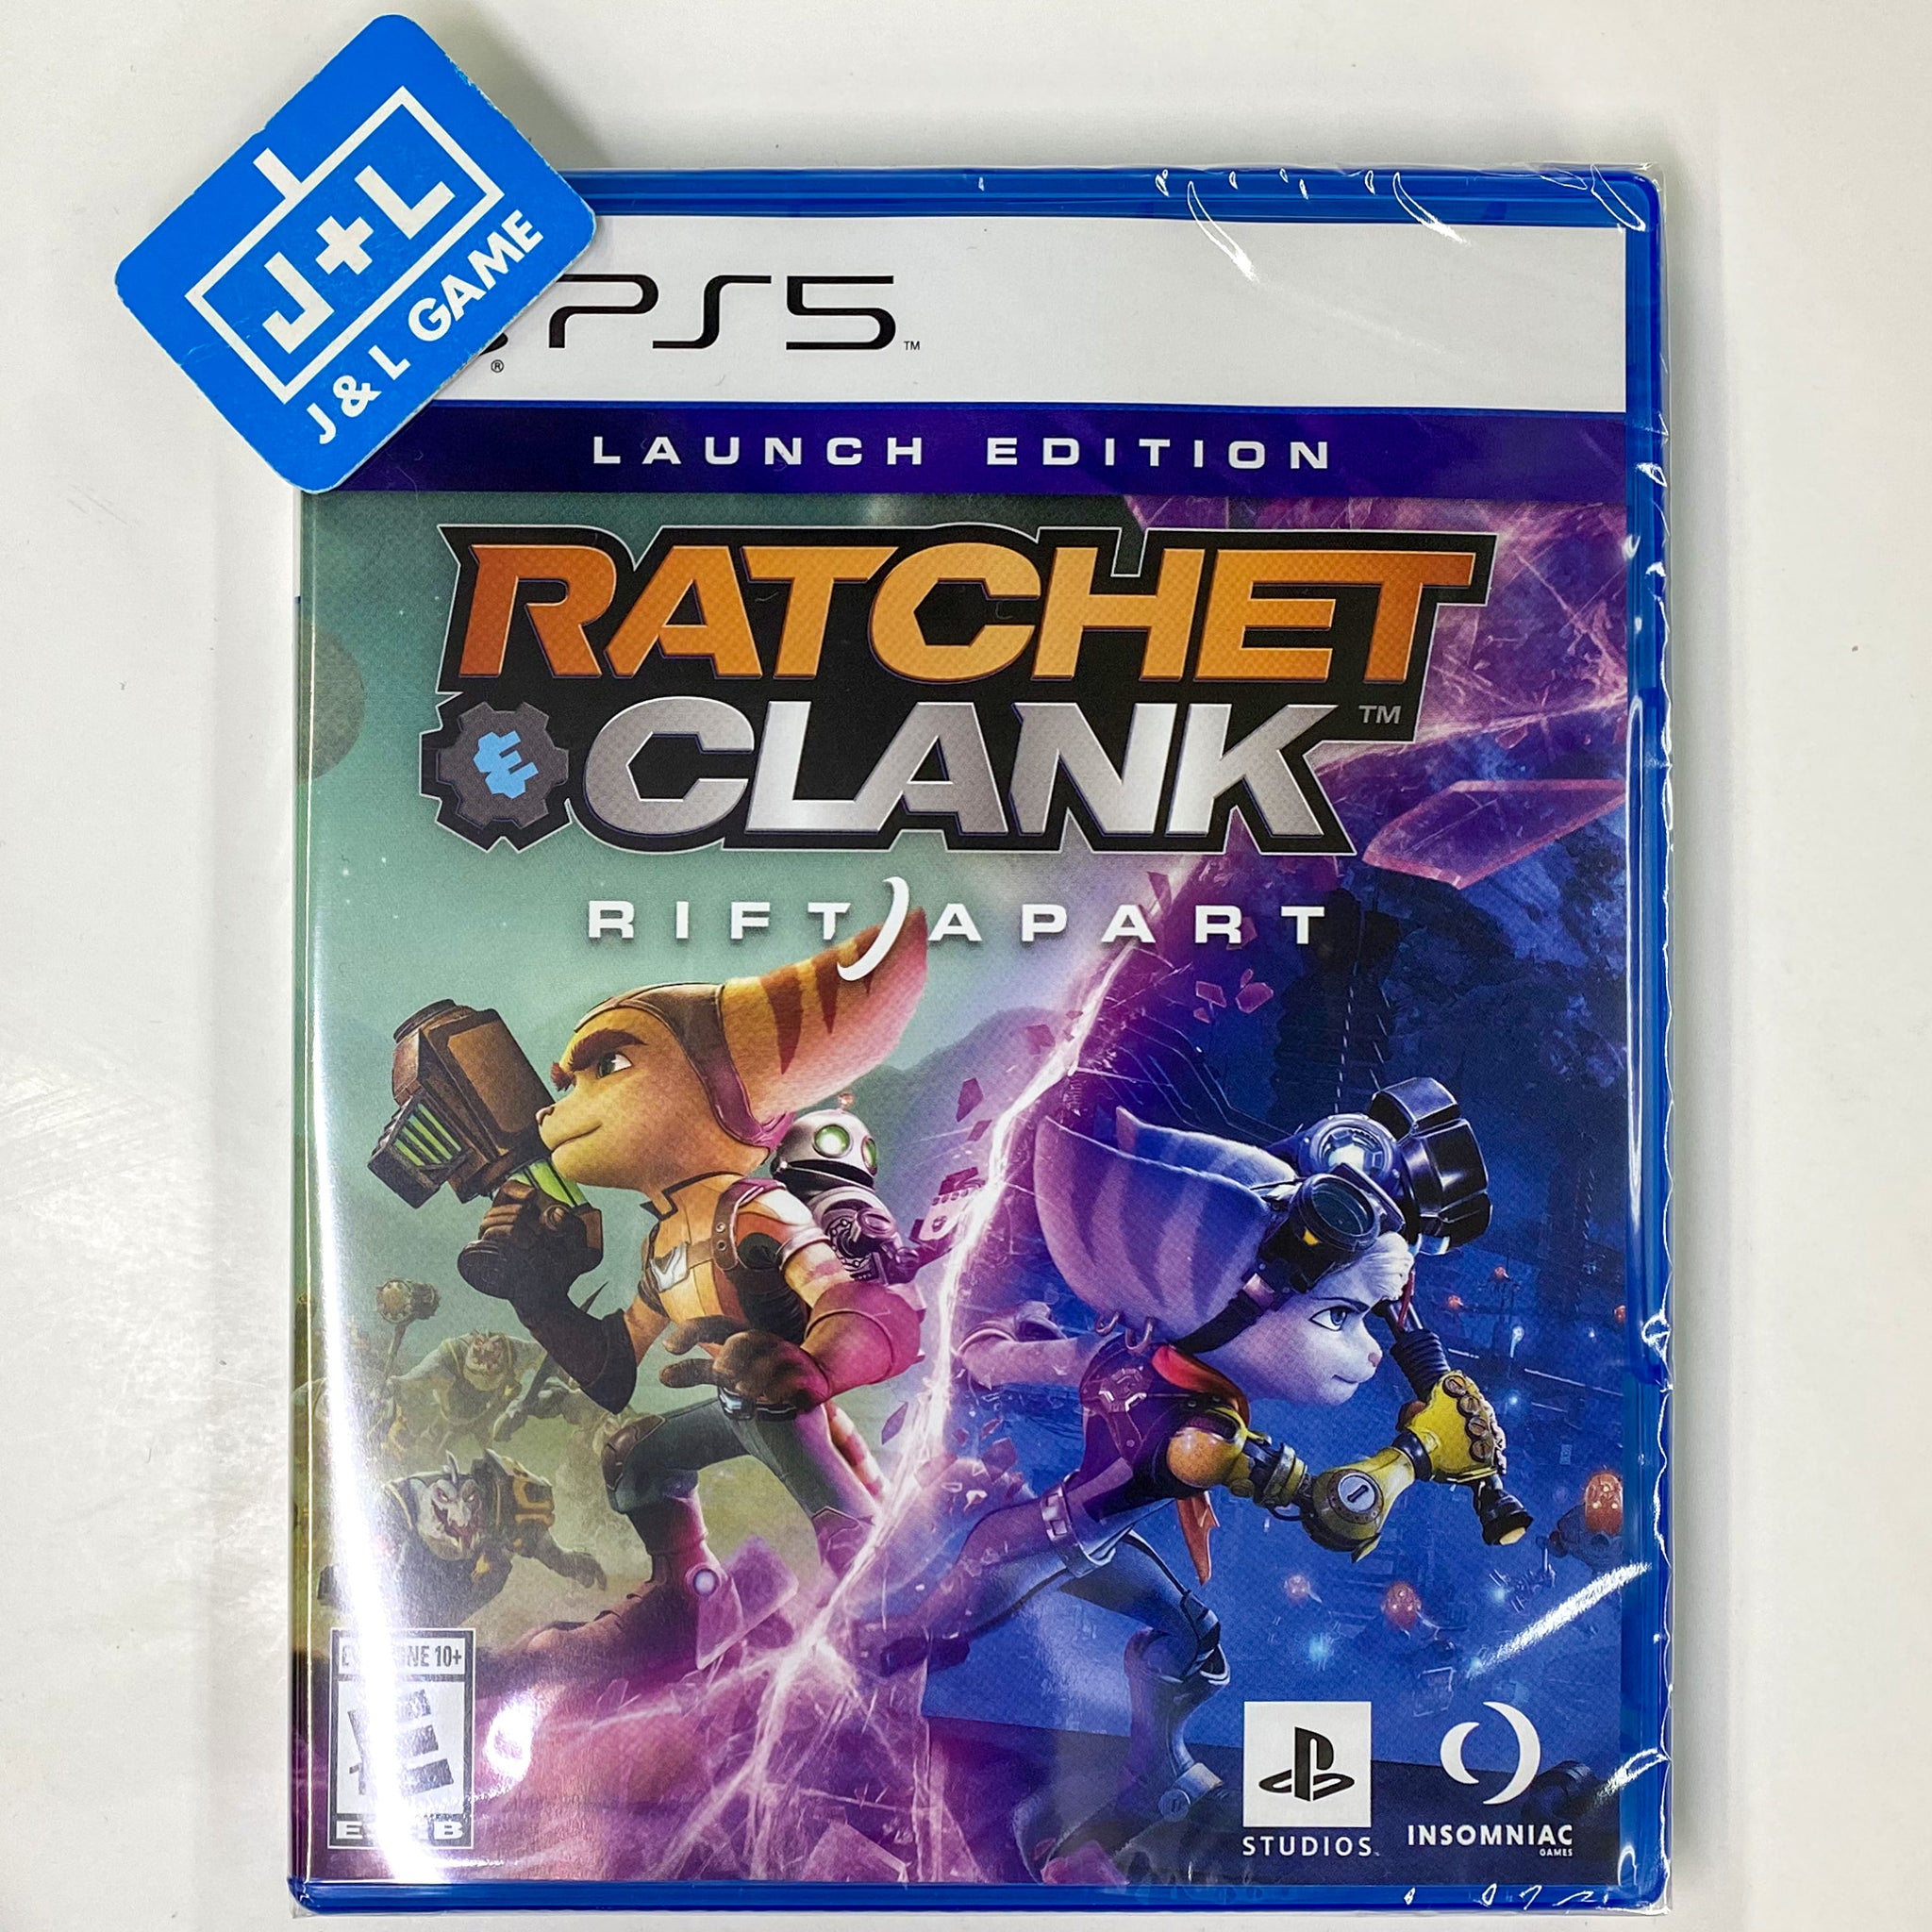 ratchet-clank-rift-apart-launch-edition-ps5-playstation-5-j-l-video-games-new-york-city